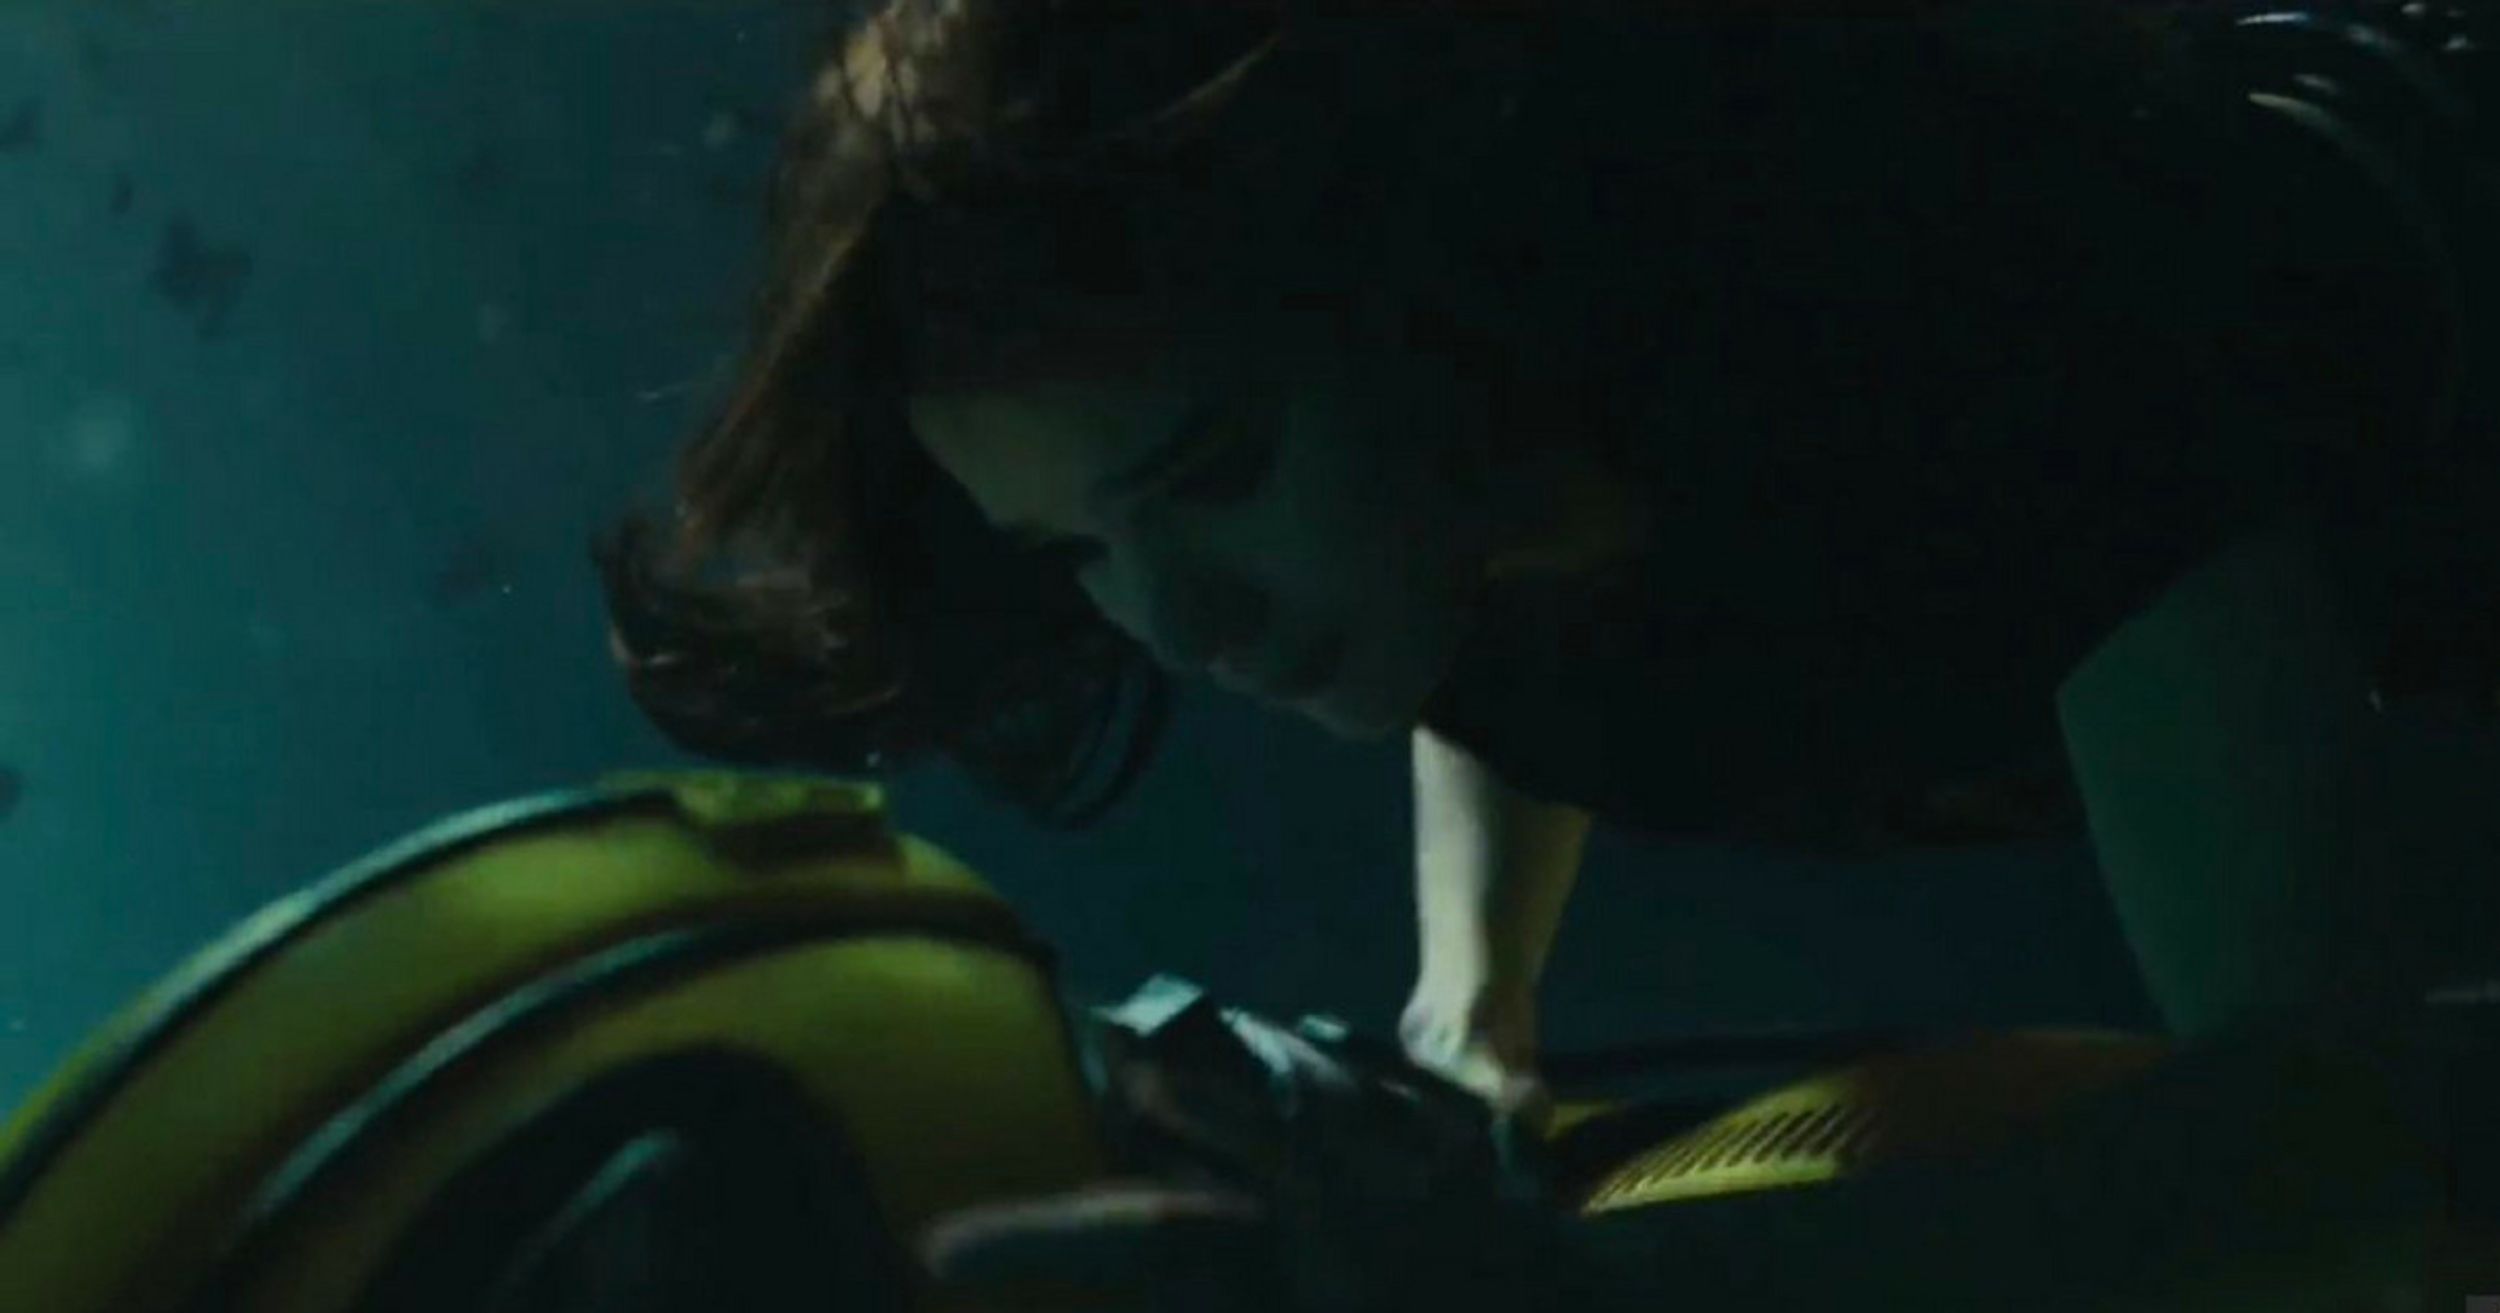 People Are Definitely Getting A 'Shape Of Water' Vibe From The New 'Bumblebee' Trailer